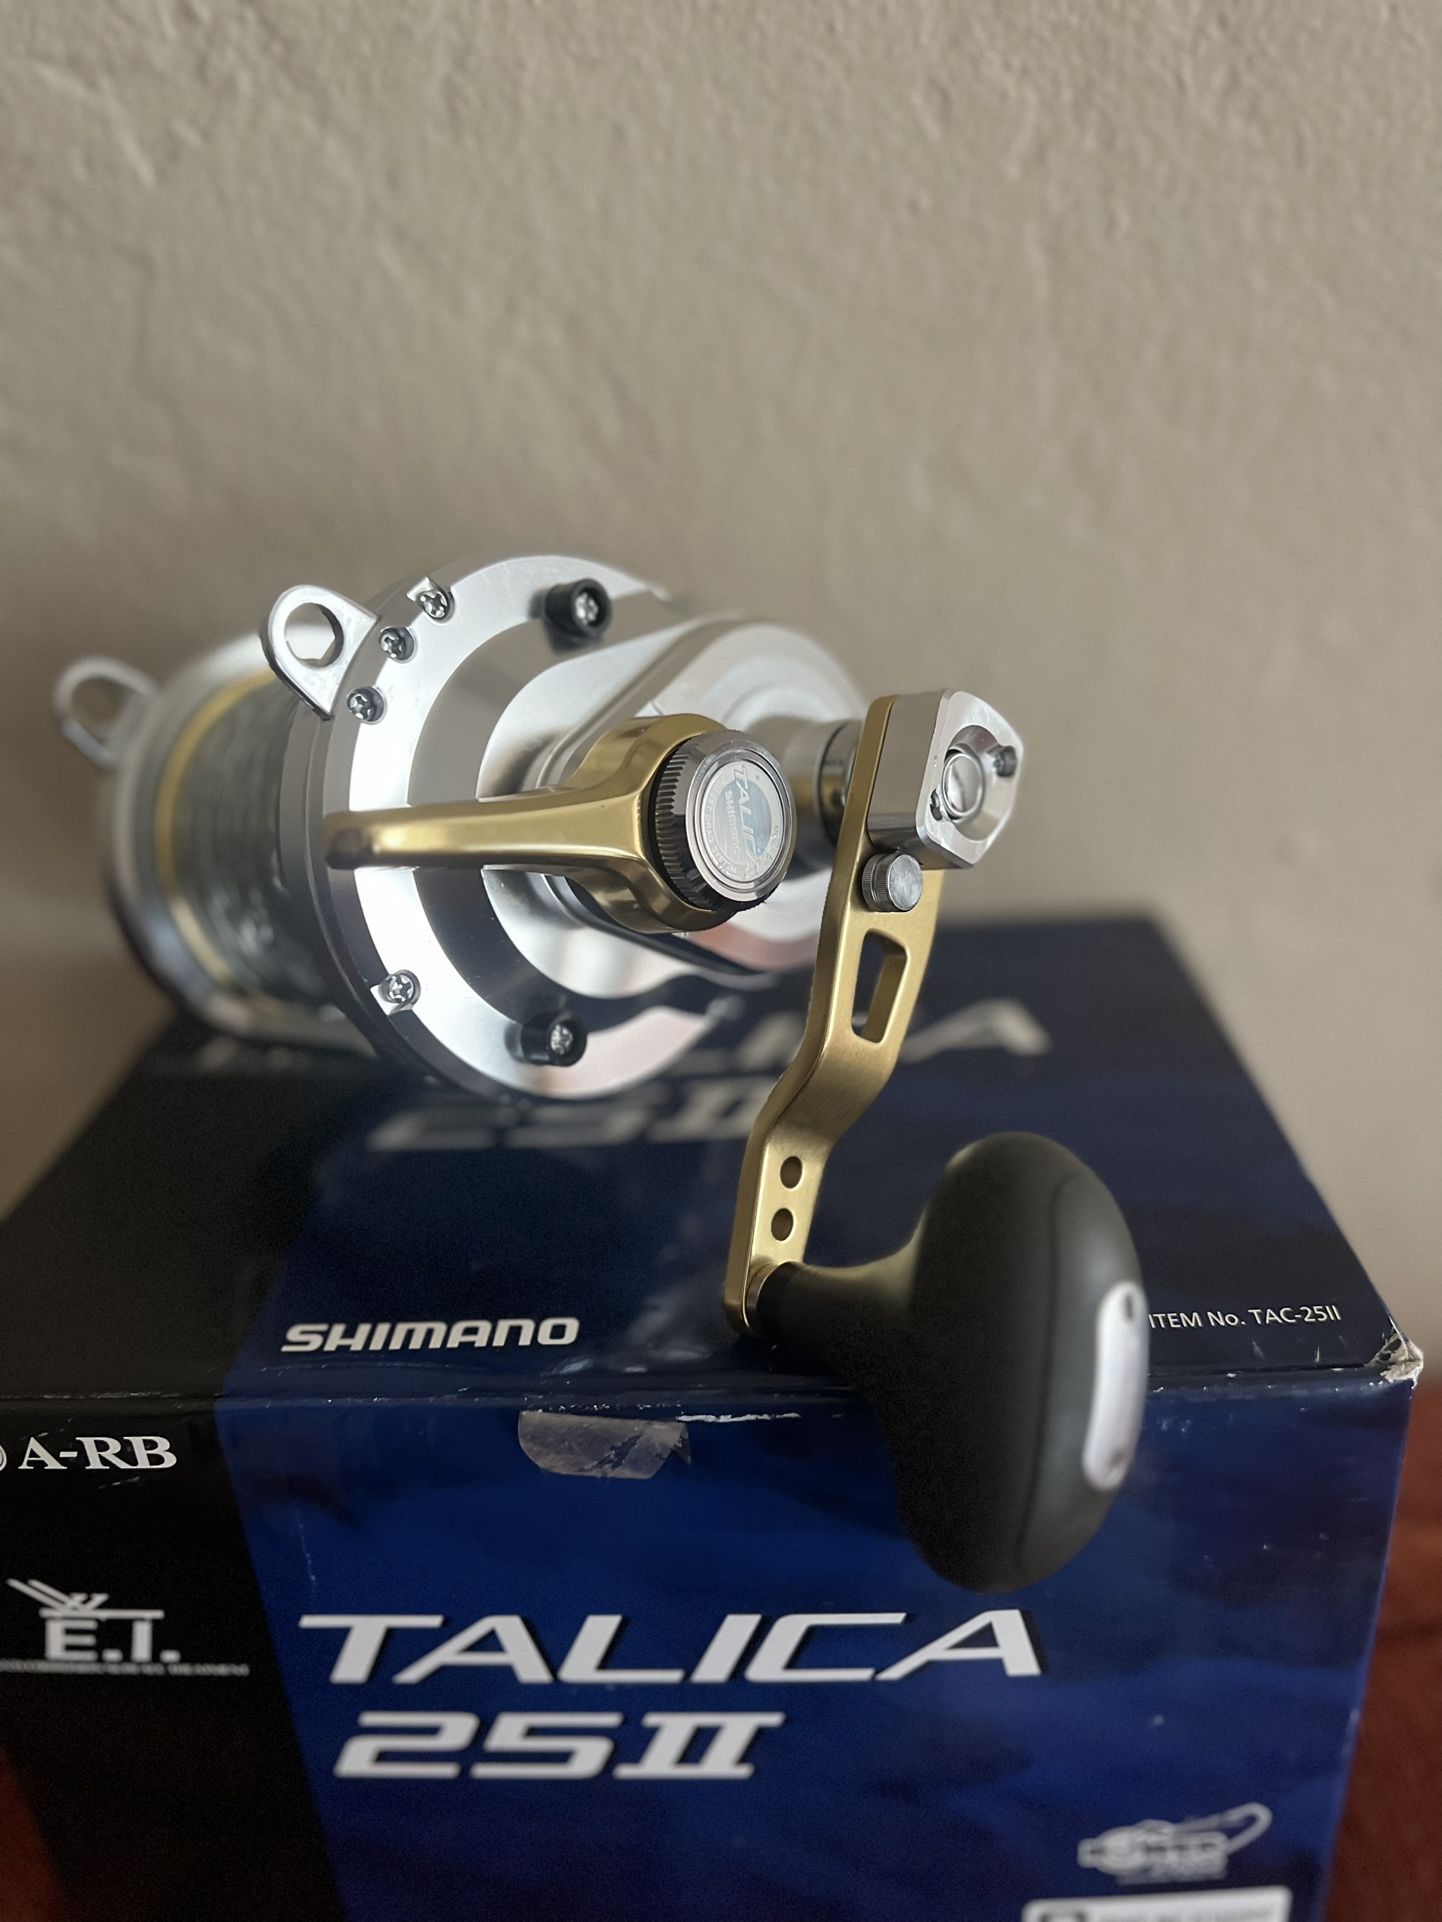 Shimano Talica for Sale in San Diego, CA - OfferUp